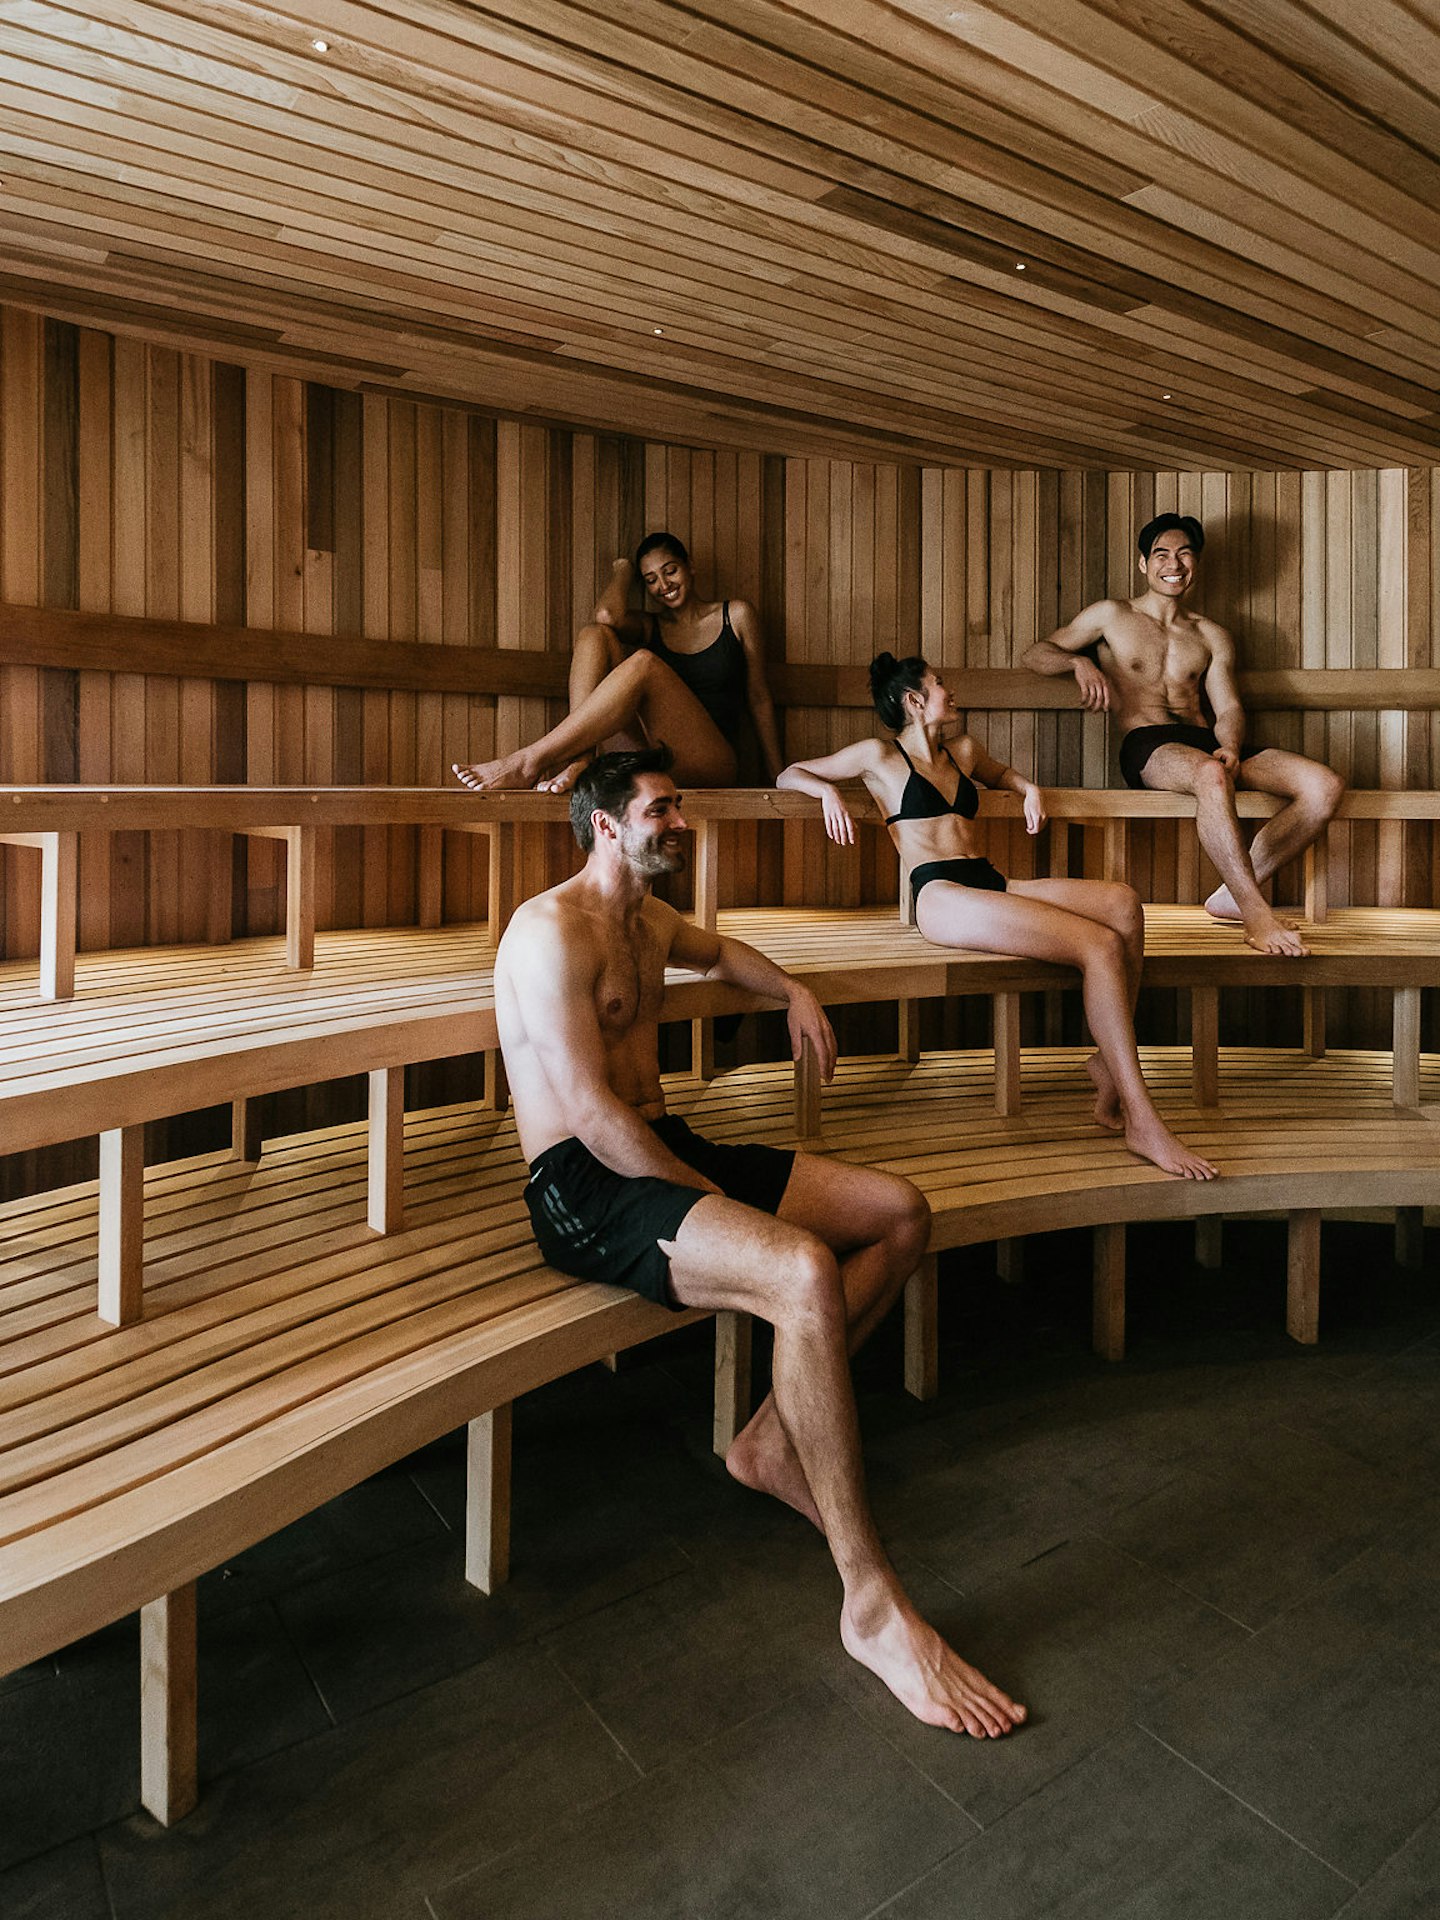 four people in bathing suits sitting in large wooden sauna